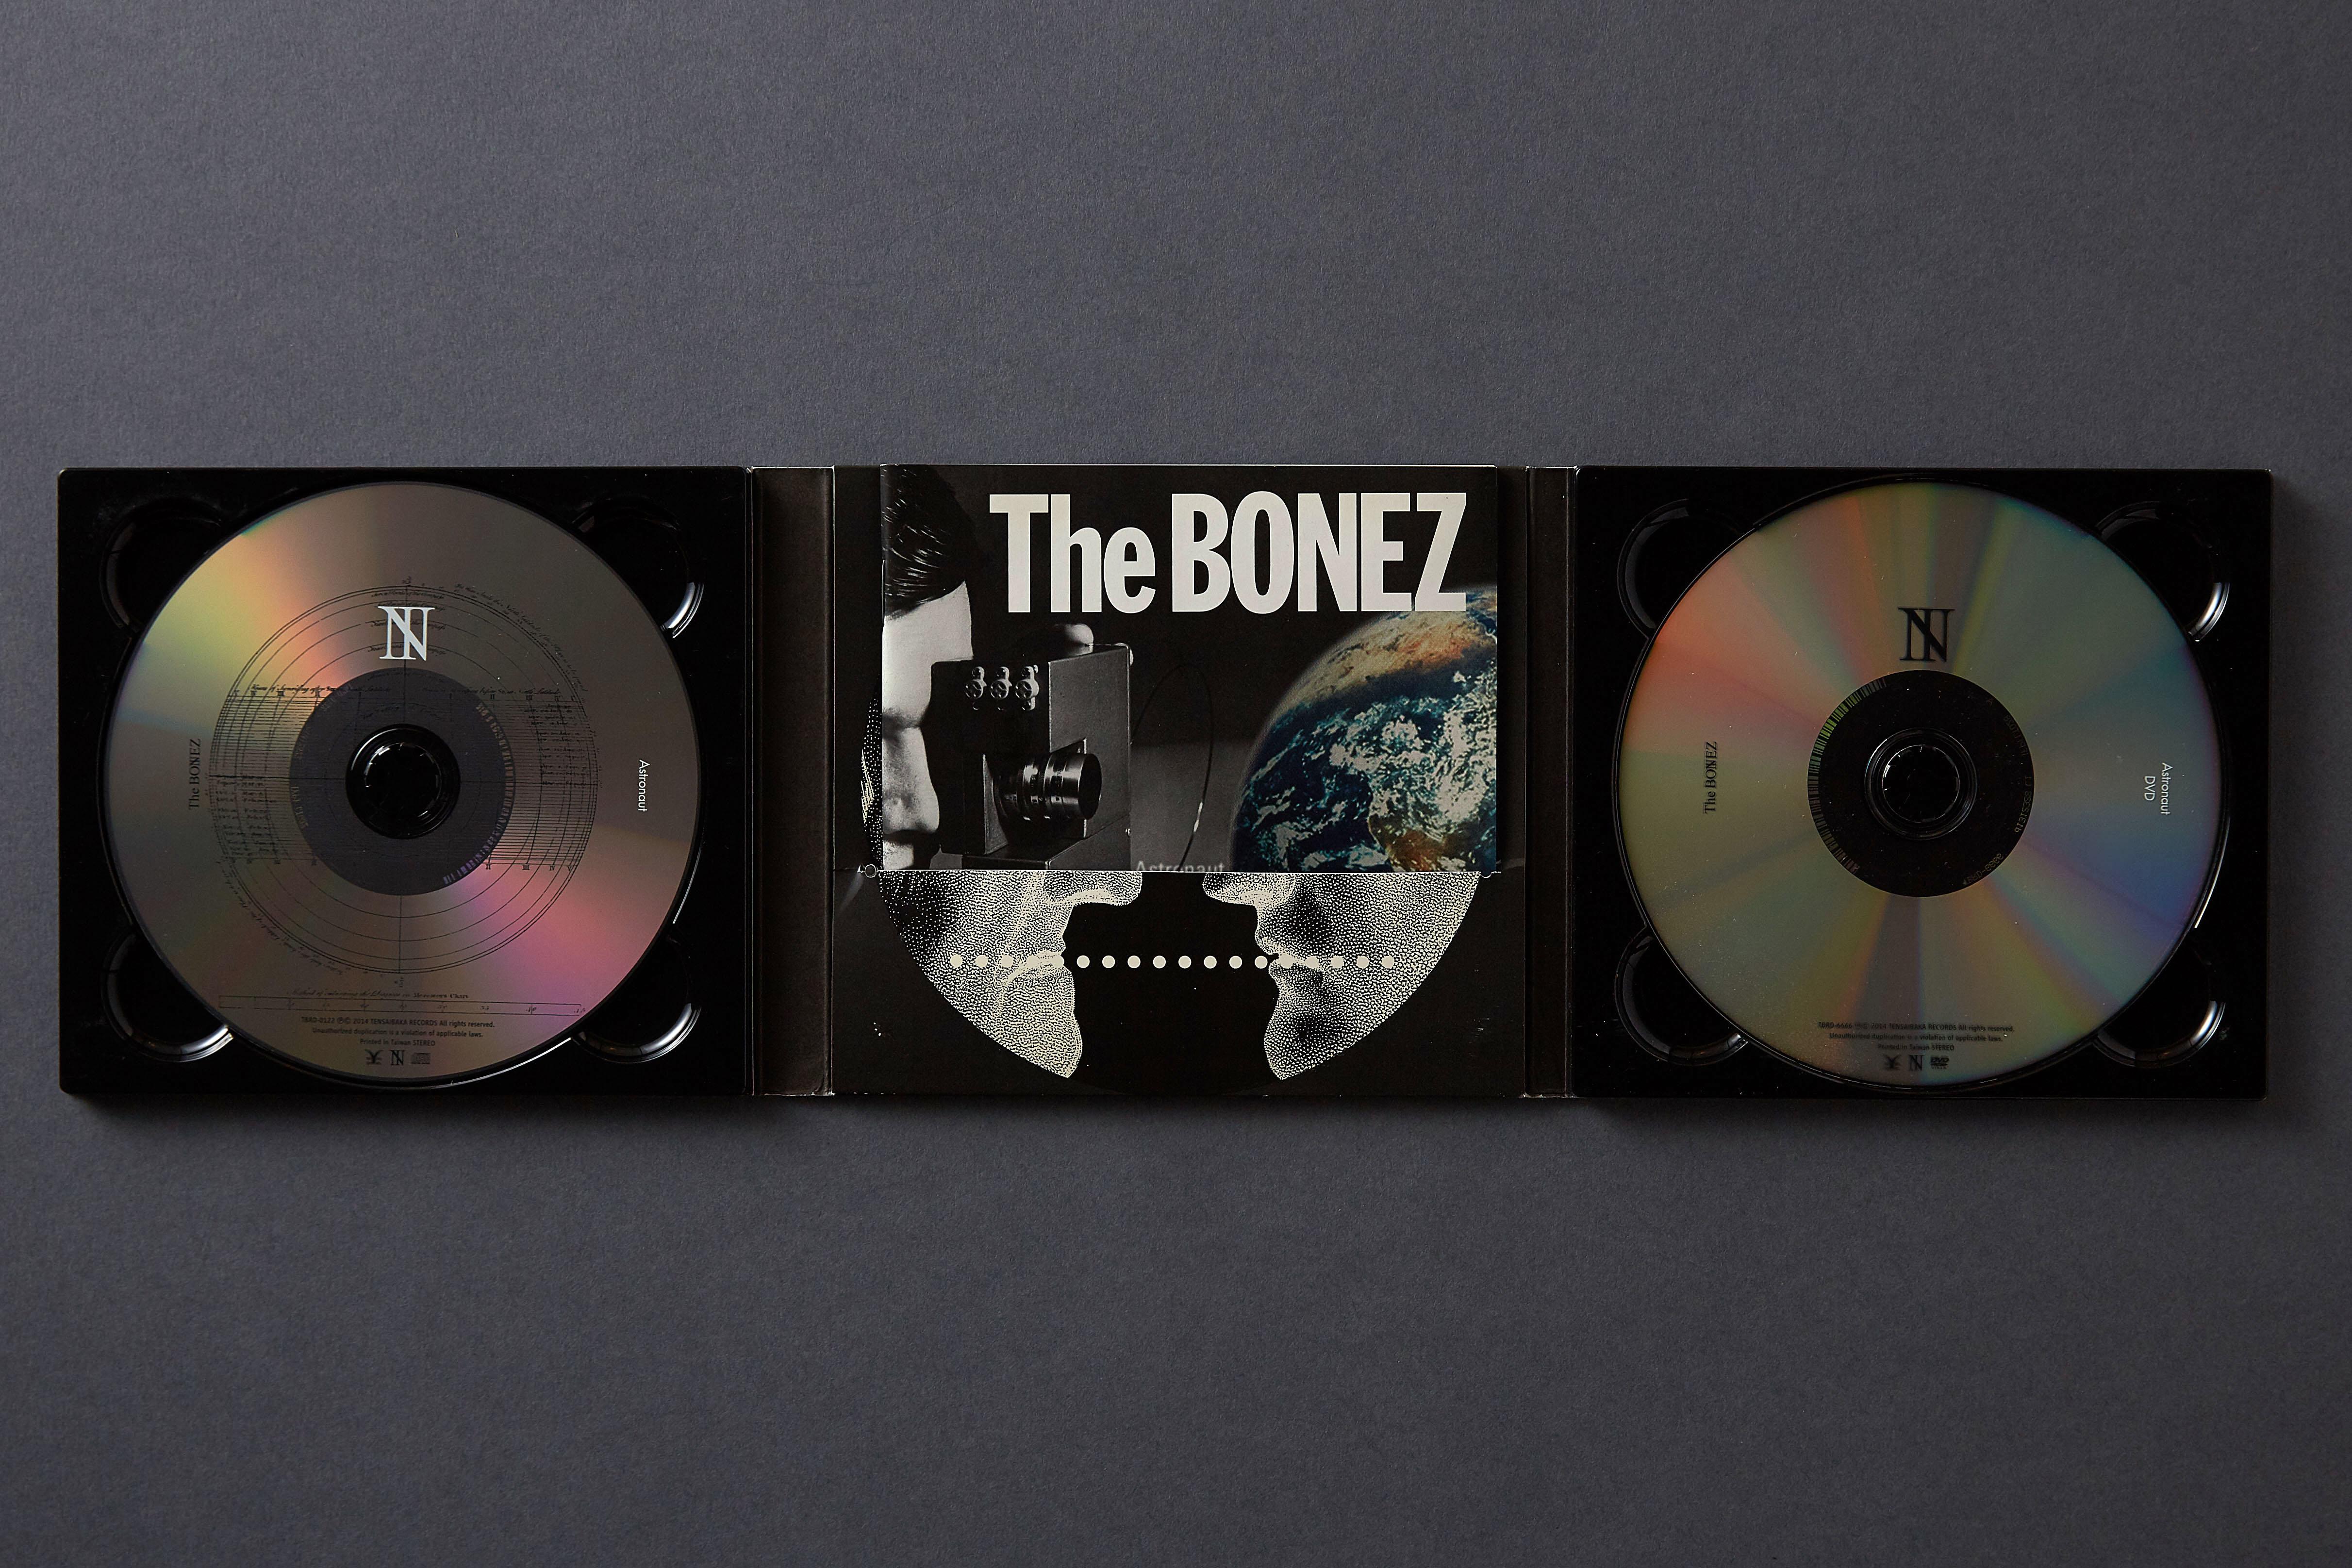 The Bonez: Astronaut (Identity and CD, 48-page booklet, 2014